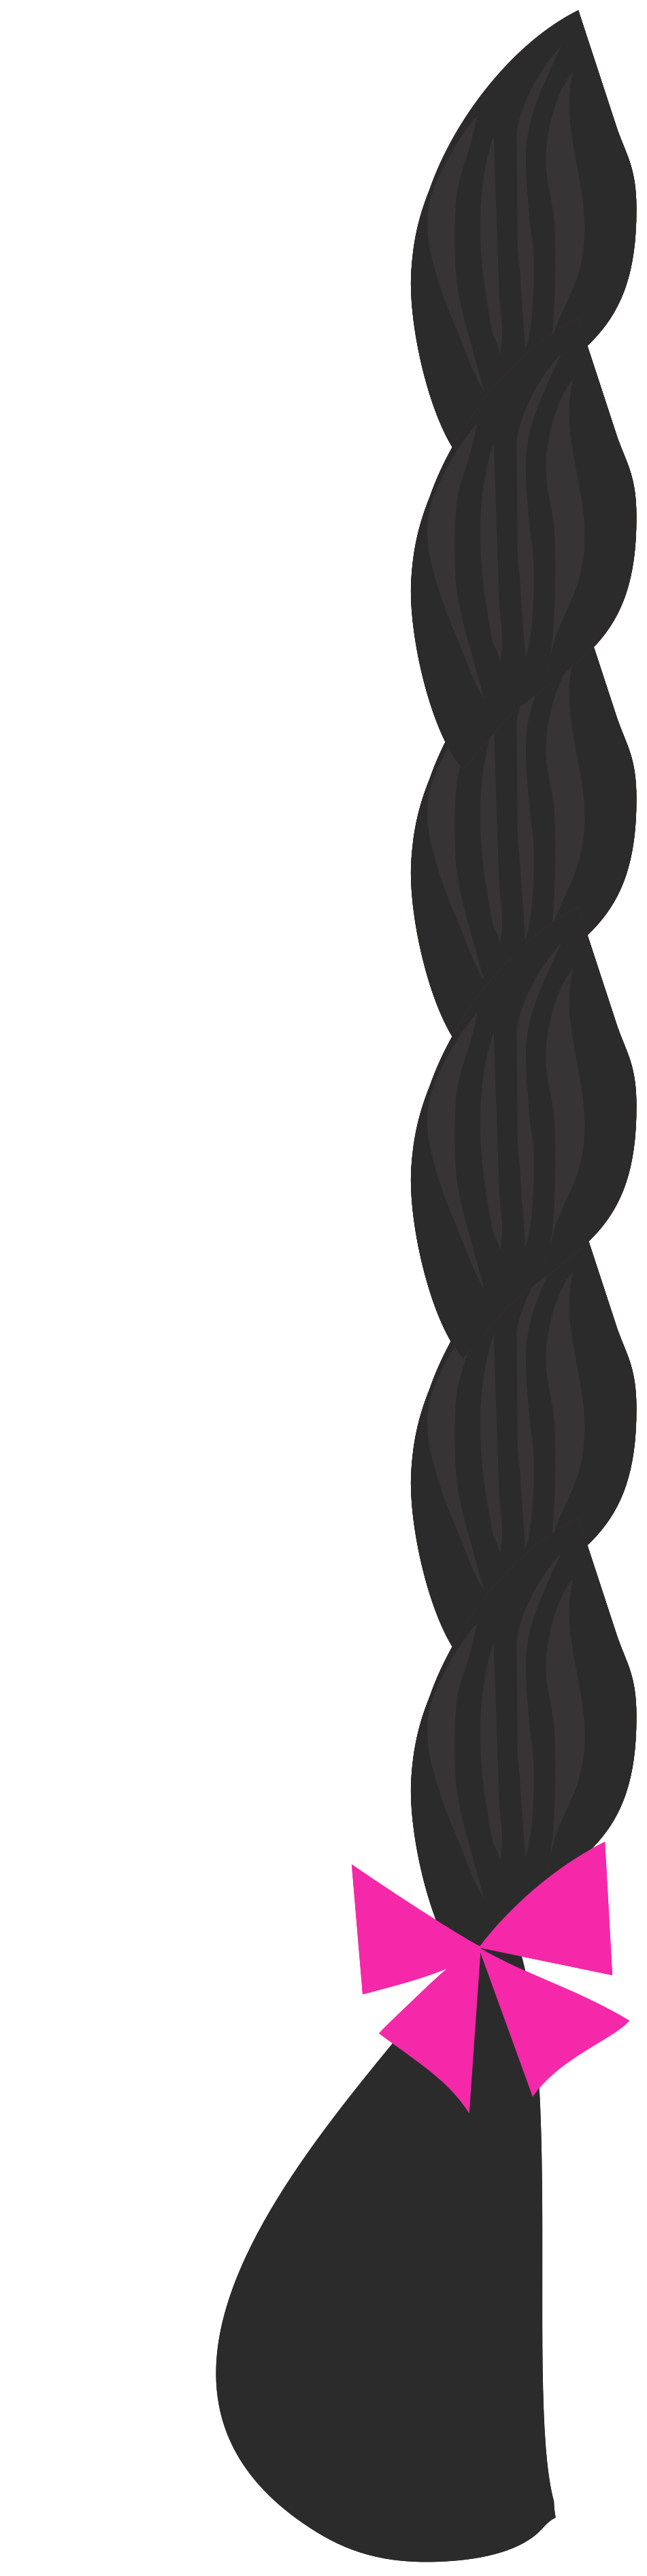 Free Braid 1202708 Png With Transparent Background